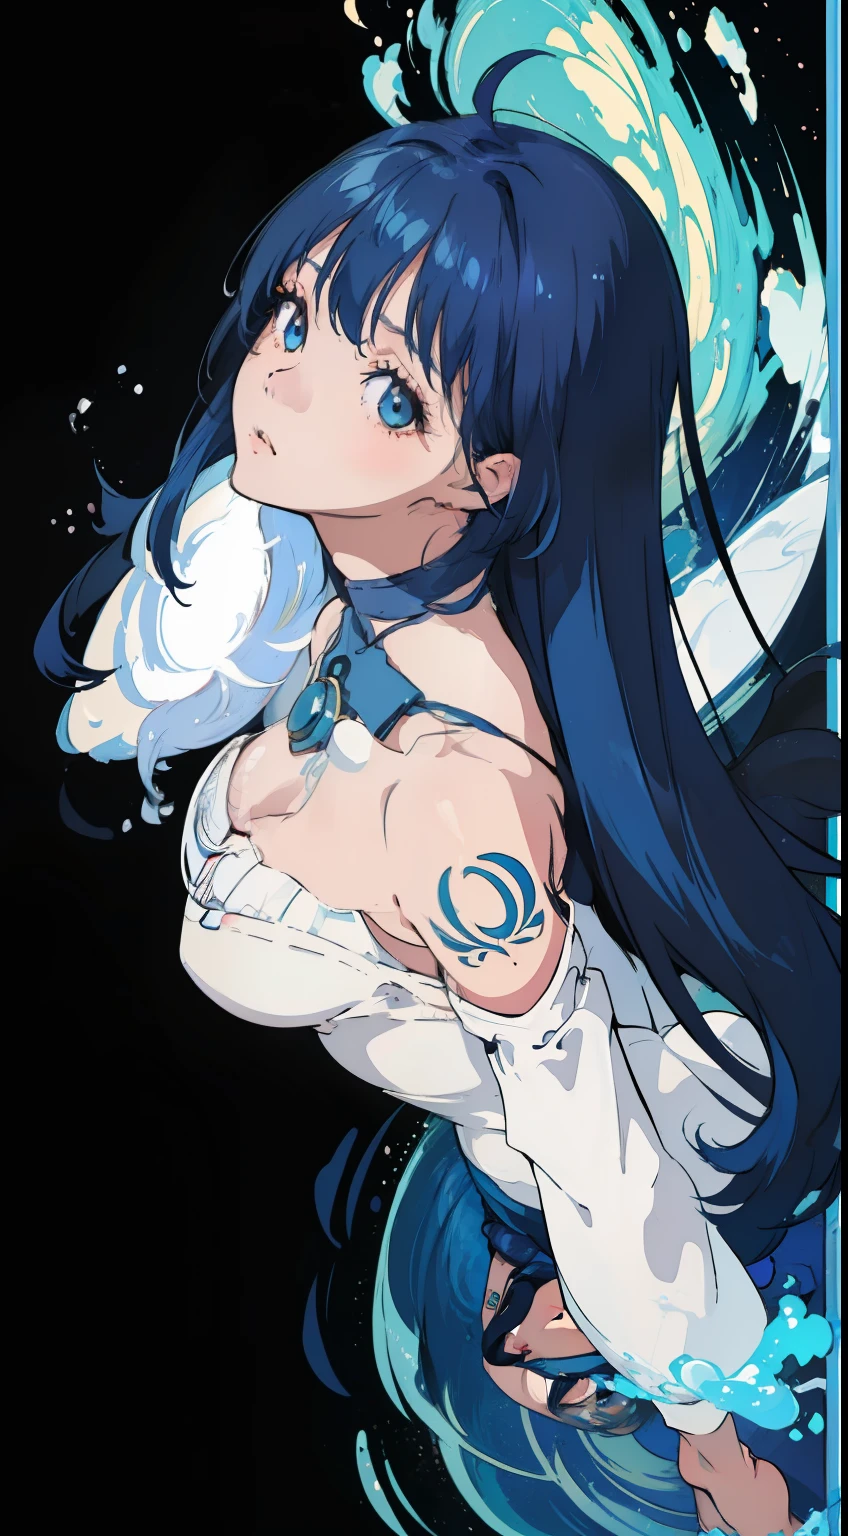 Ultra-high definition 2D art, close-up (1 woman), light blue hair, 2D animation style, soft and delicate depiction, attention also on her full-body tattoos (full-body art), landscape mode, masterpieces by Guweiz and James Jean, tattoo expert designs by CGSCOSITY, etc. A beautiful blue-haired girl who became a hot topic at the trend art station of Japan.